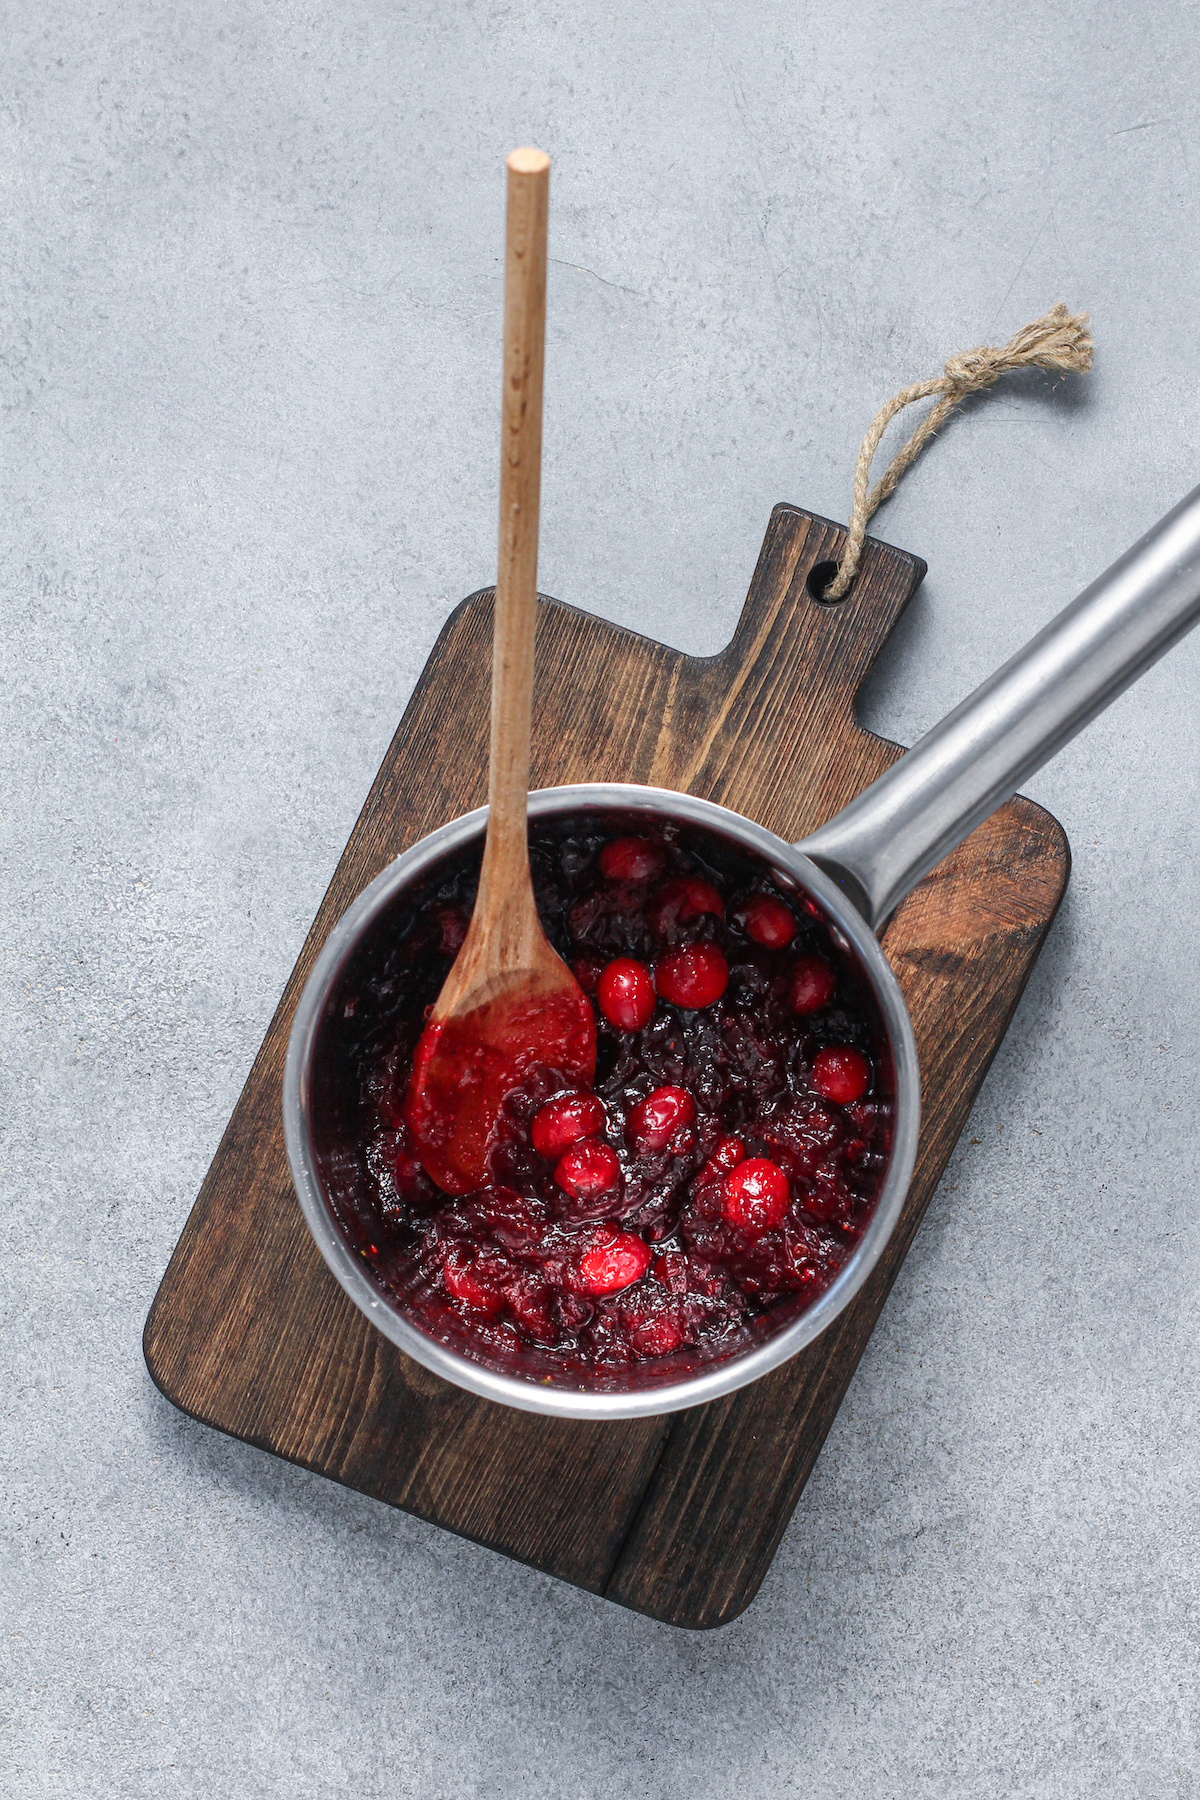 Homemade cranberry sauce in a sauce pan with a wooden spoon.